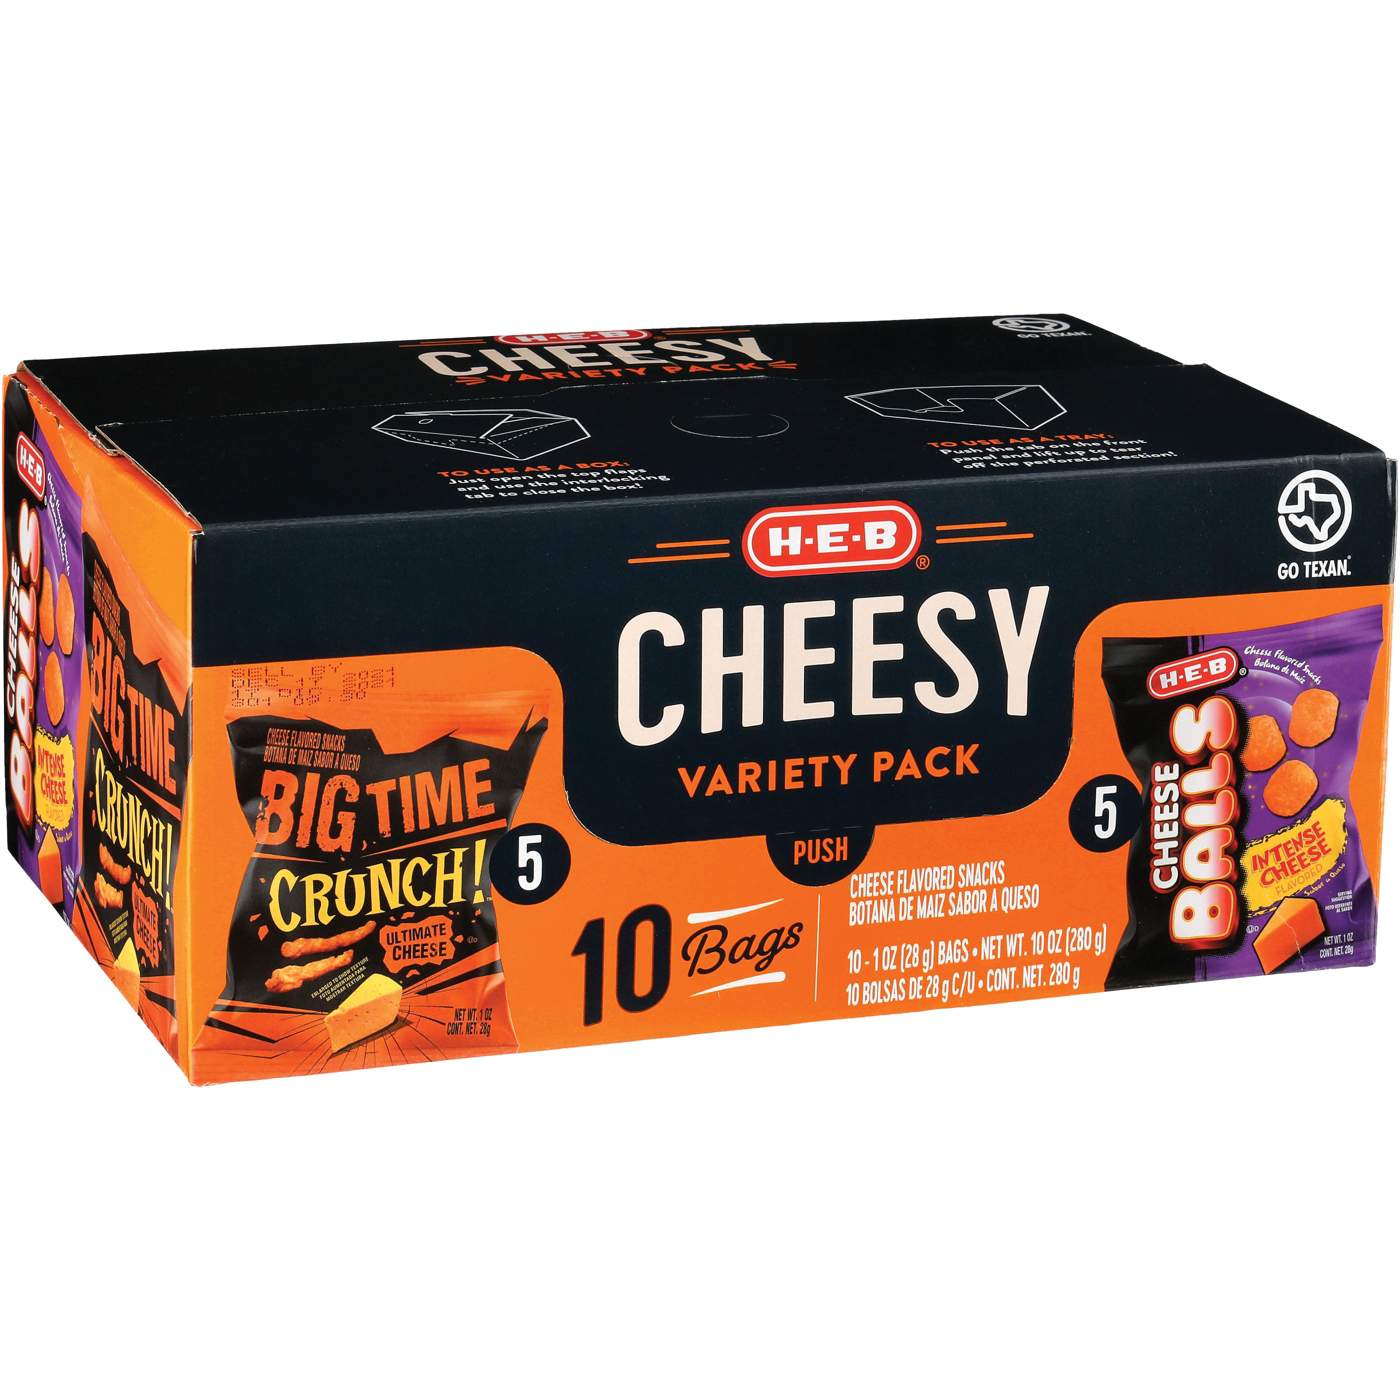 H-E-B Cheesy Chips Variety Pack 1 oz Bags; image 1 of 3